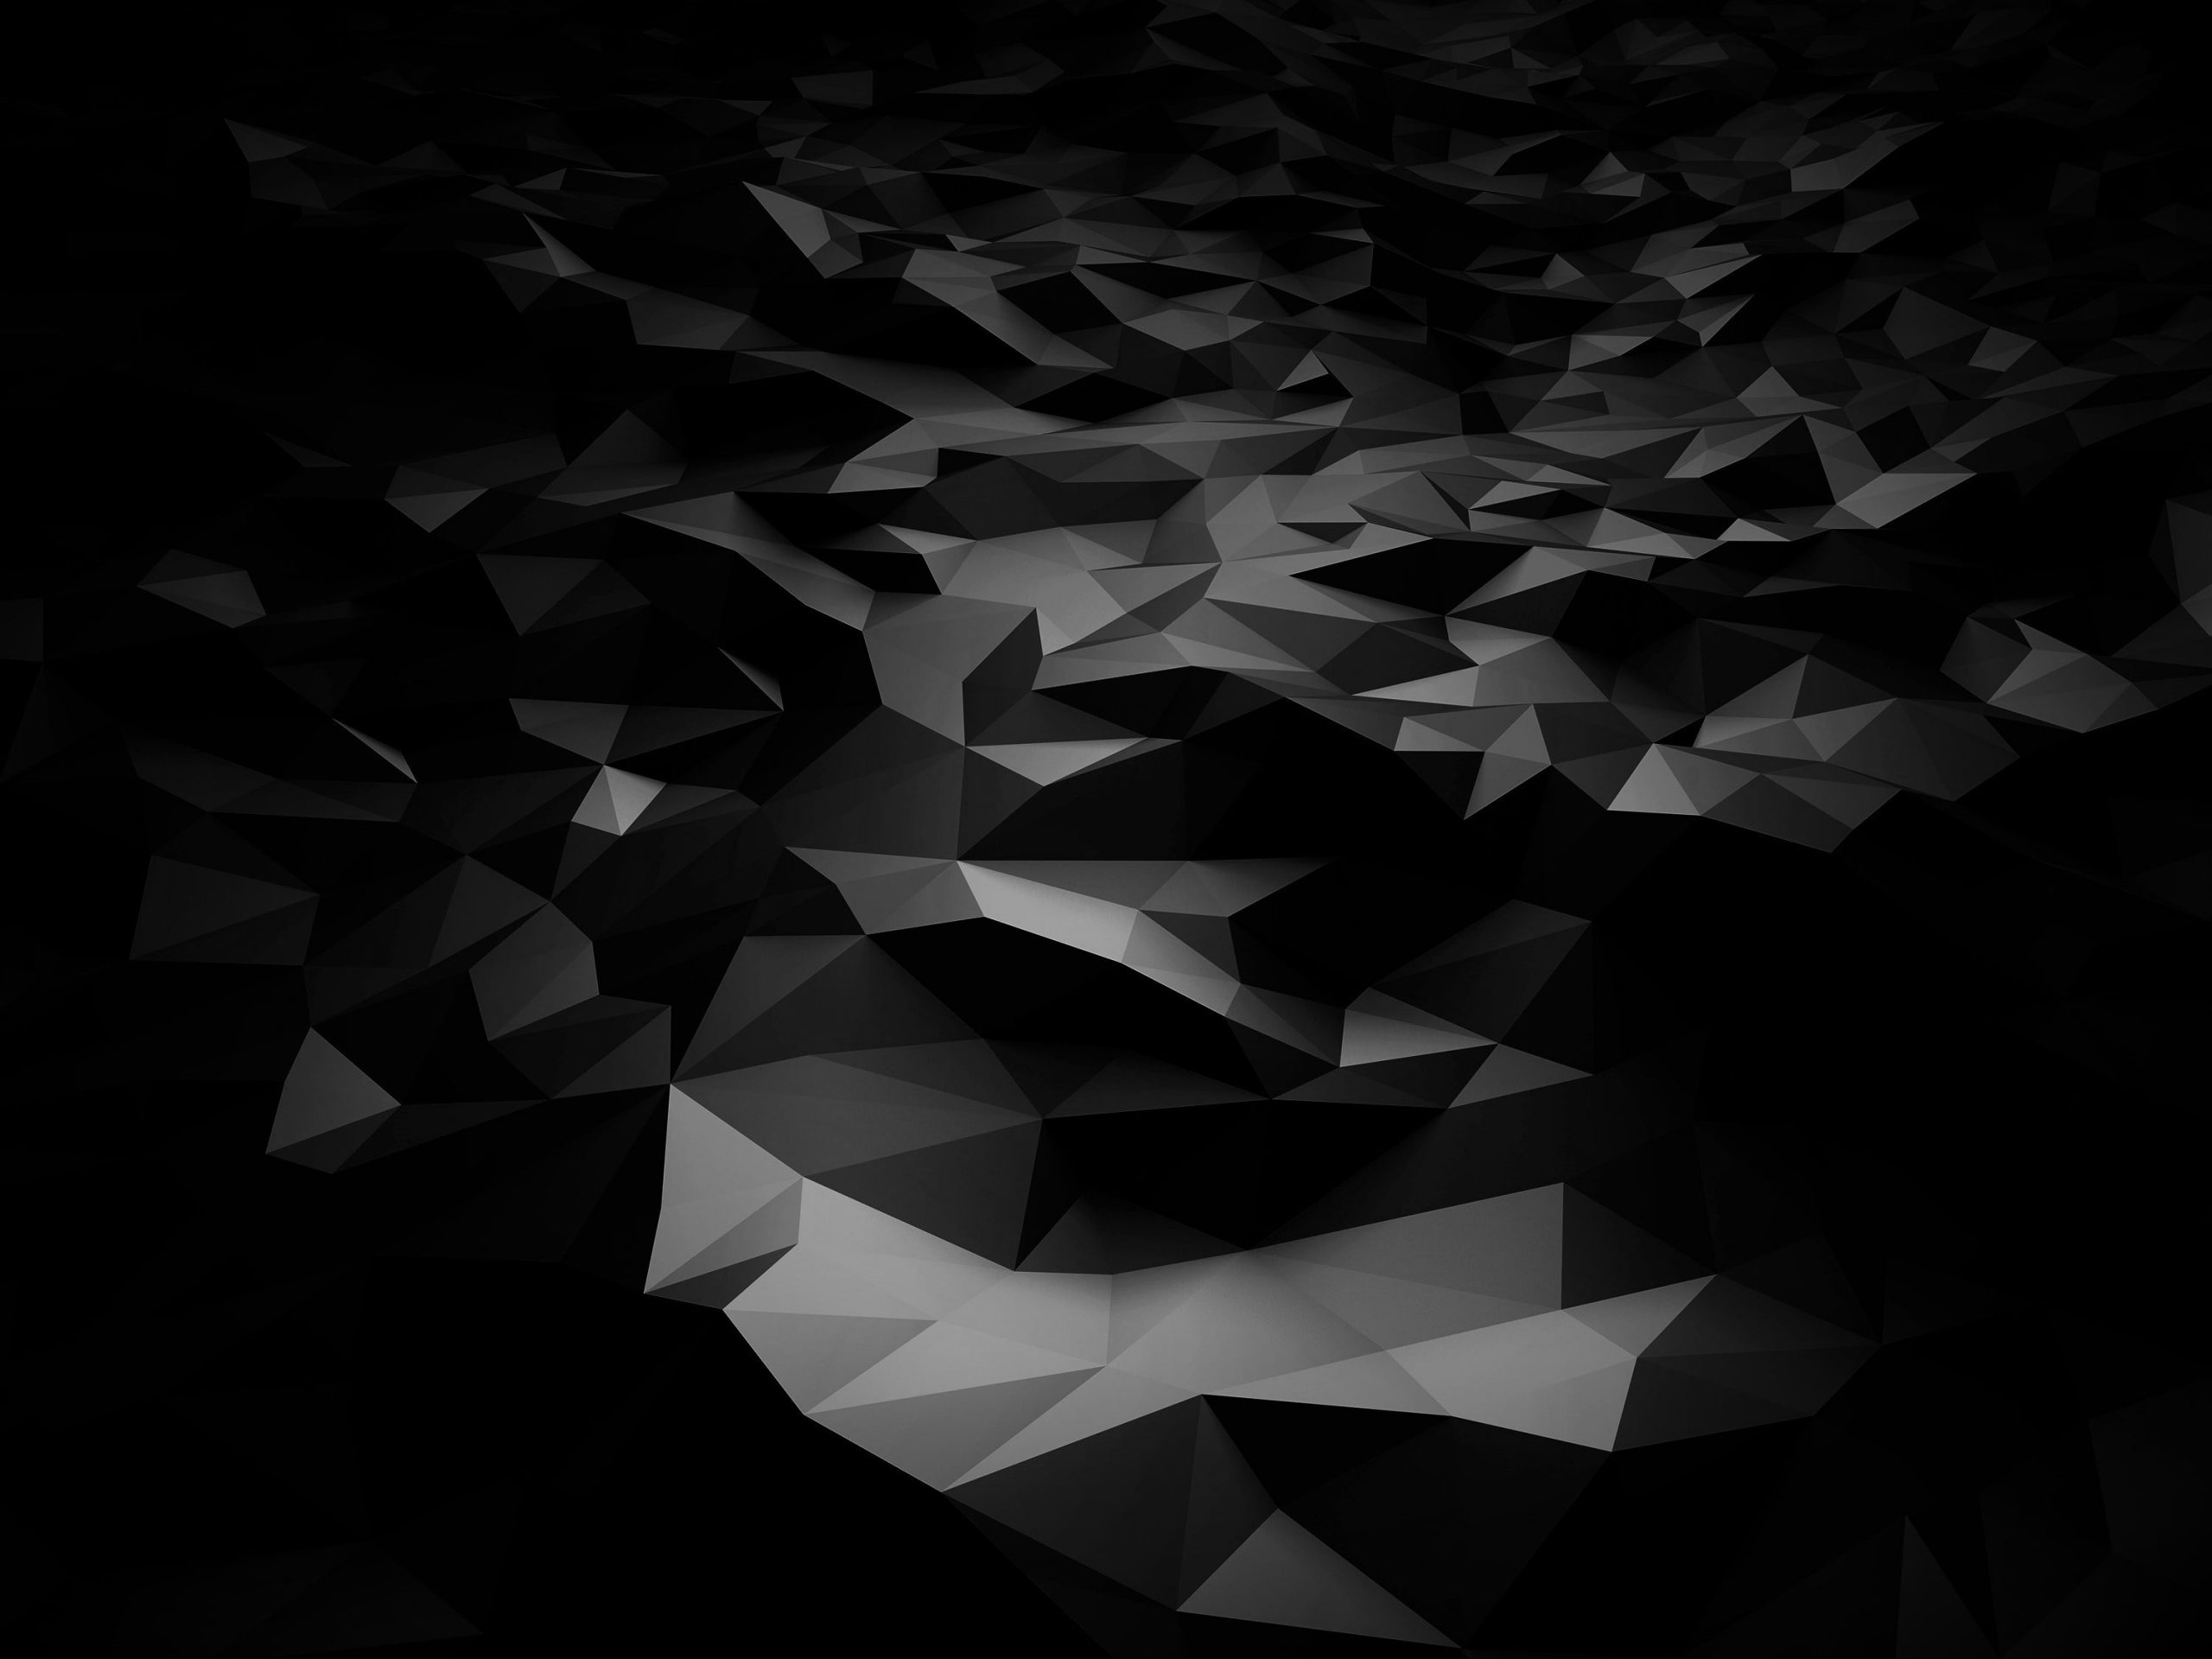 Abstract wallpaper, abstract, 3D, black, dark, polygon art, pattern, no people